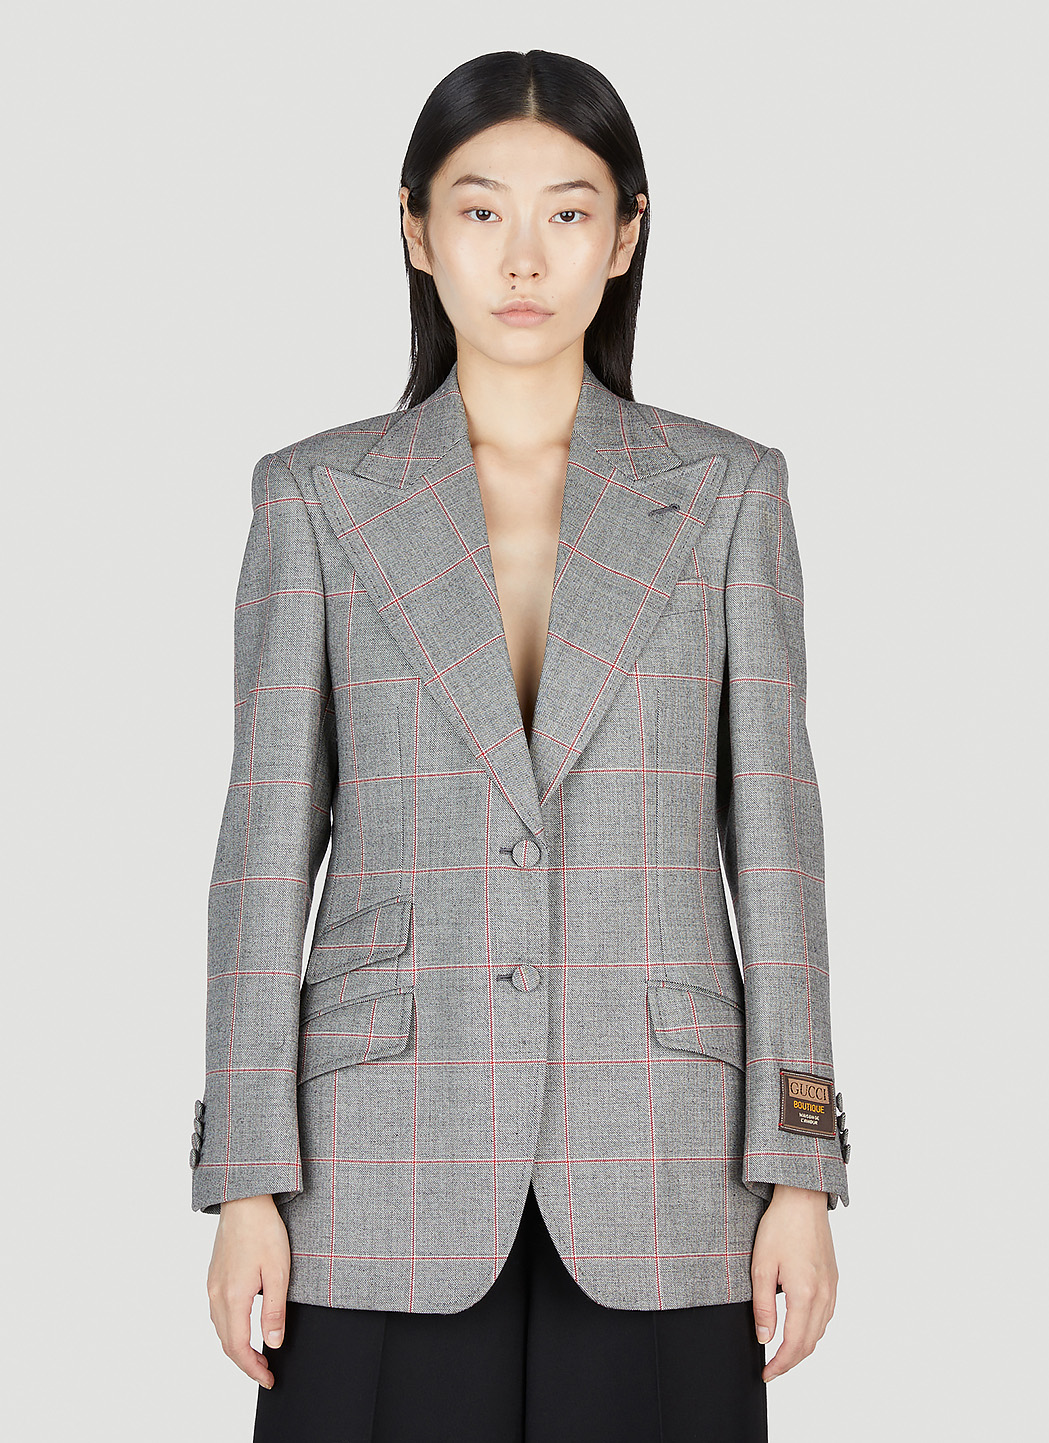 Tom Ford for Gucci 2003 Collection Safari White Cotton Belted Pant Suit 44  at 1stDibs | white gucci suit, gucci white suit, gucci white pant suit